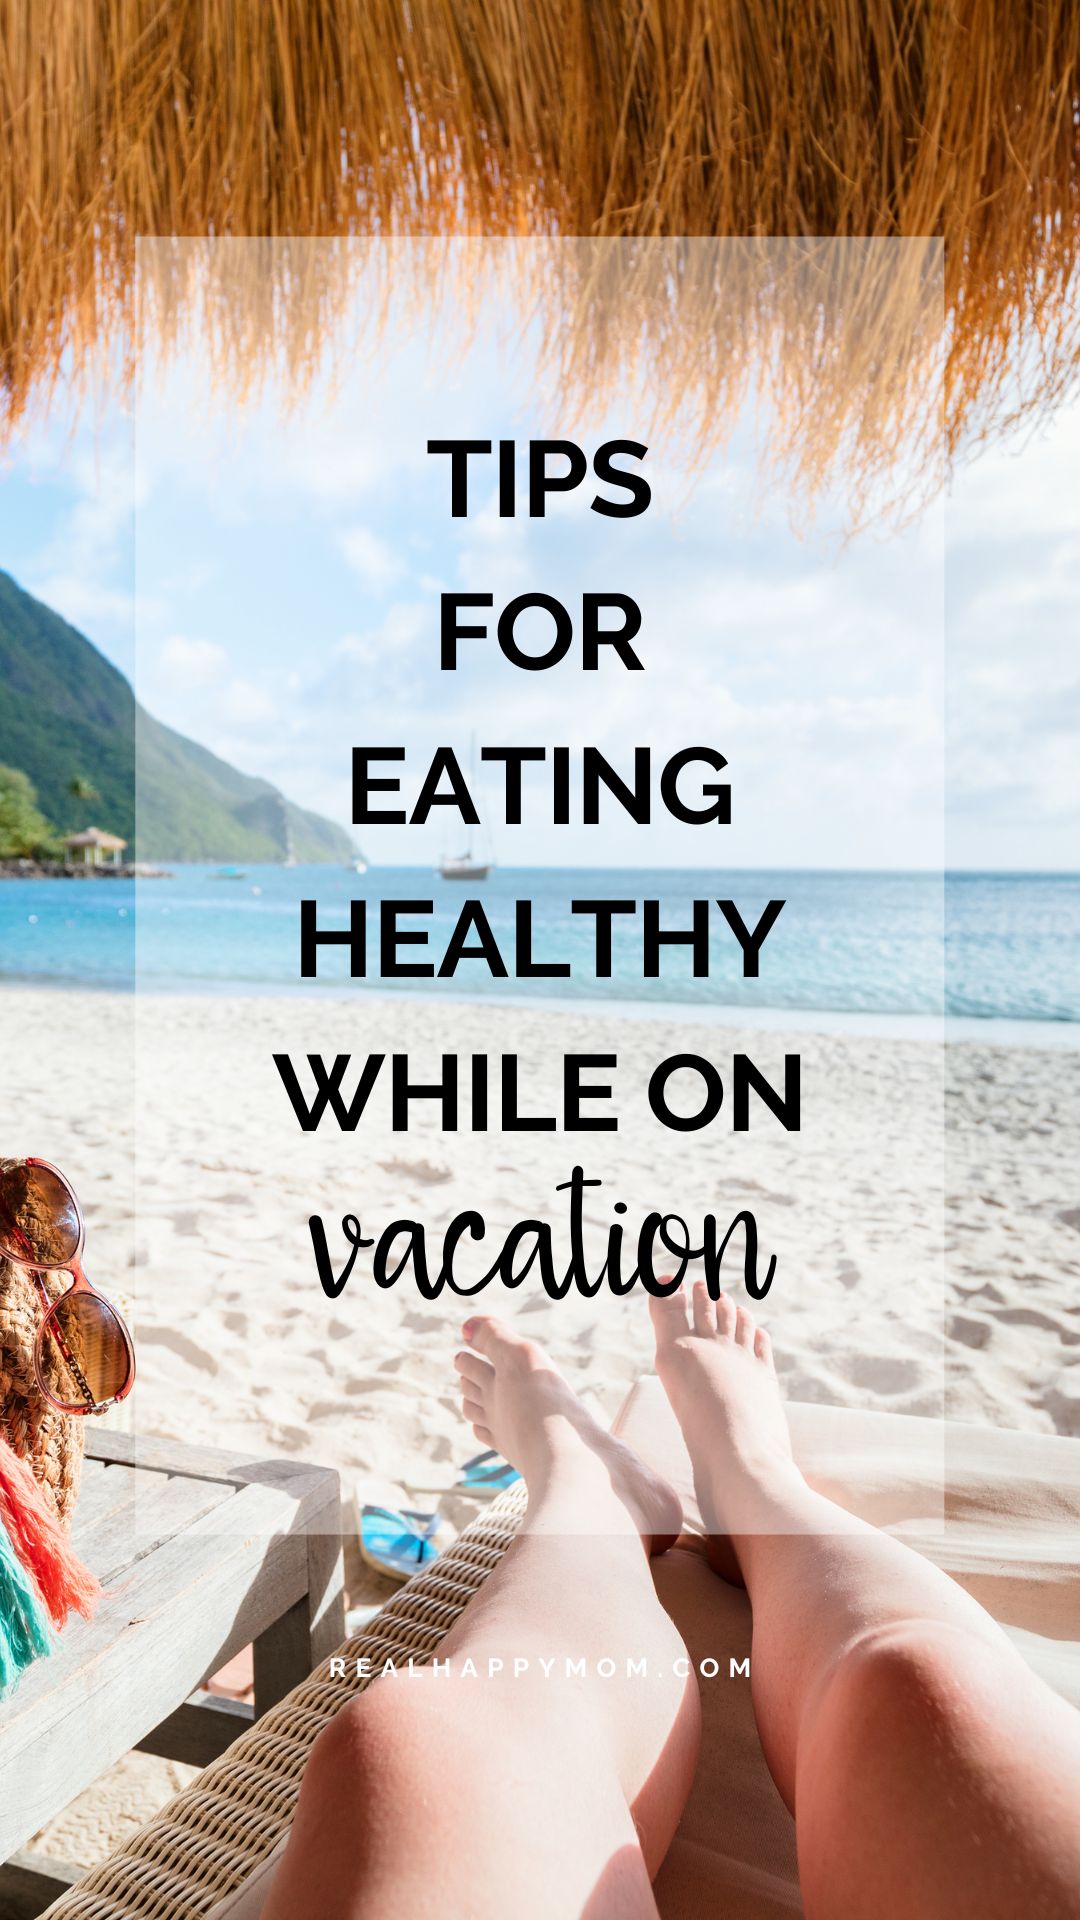 Tips for Eating Healthy While on Vacation